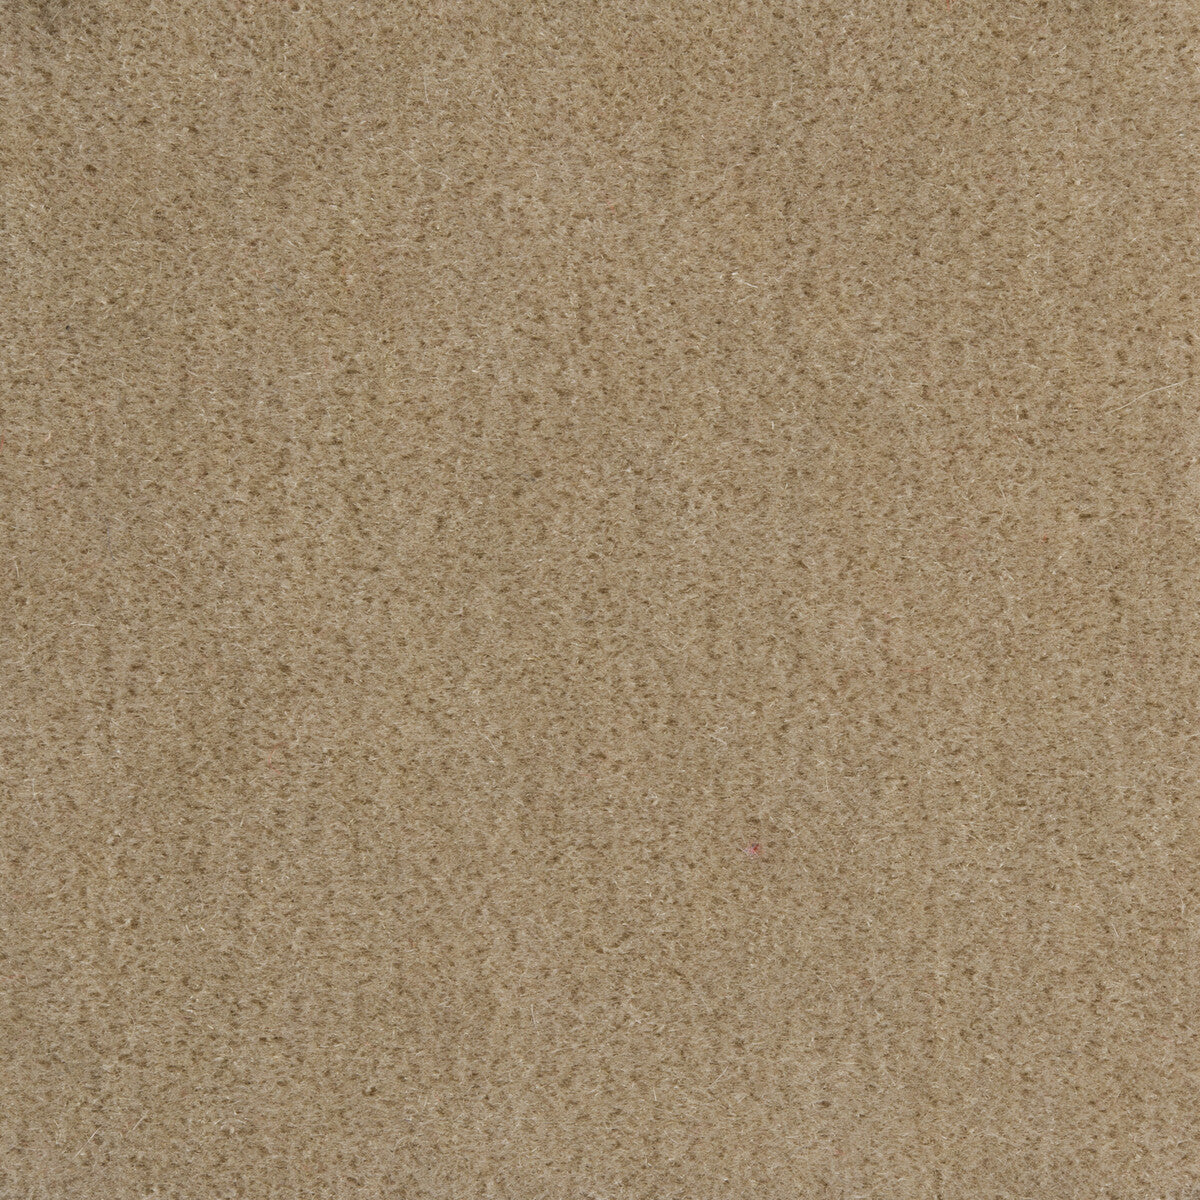 Windsor Mohair fabric in atmosphere color - pattern 34258.11.0 - by Kravet Couture